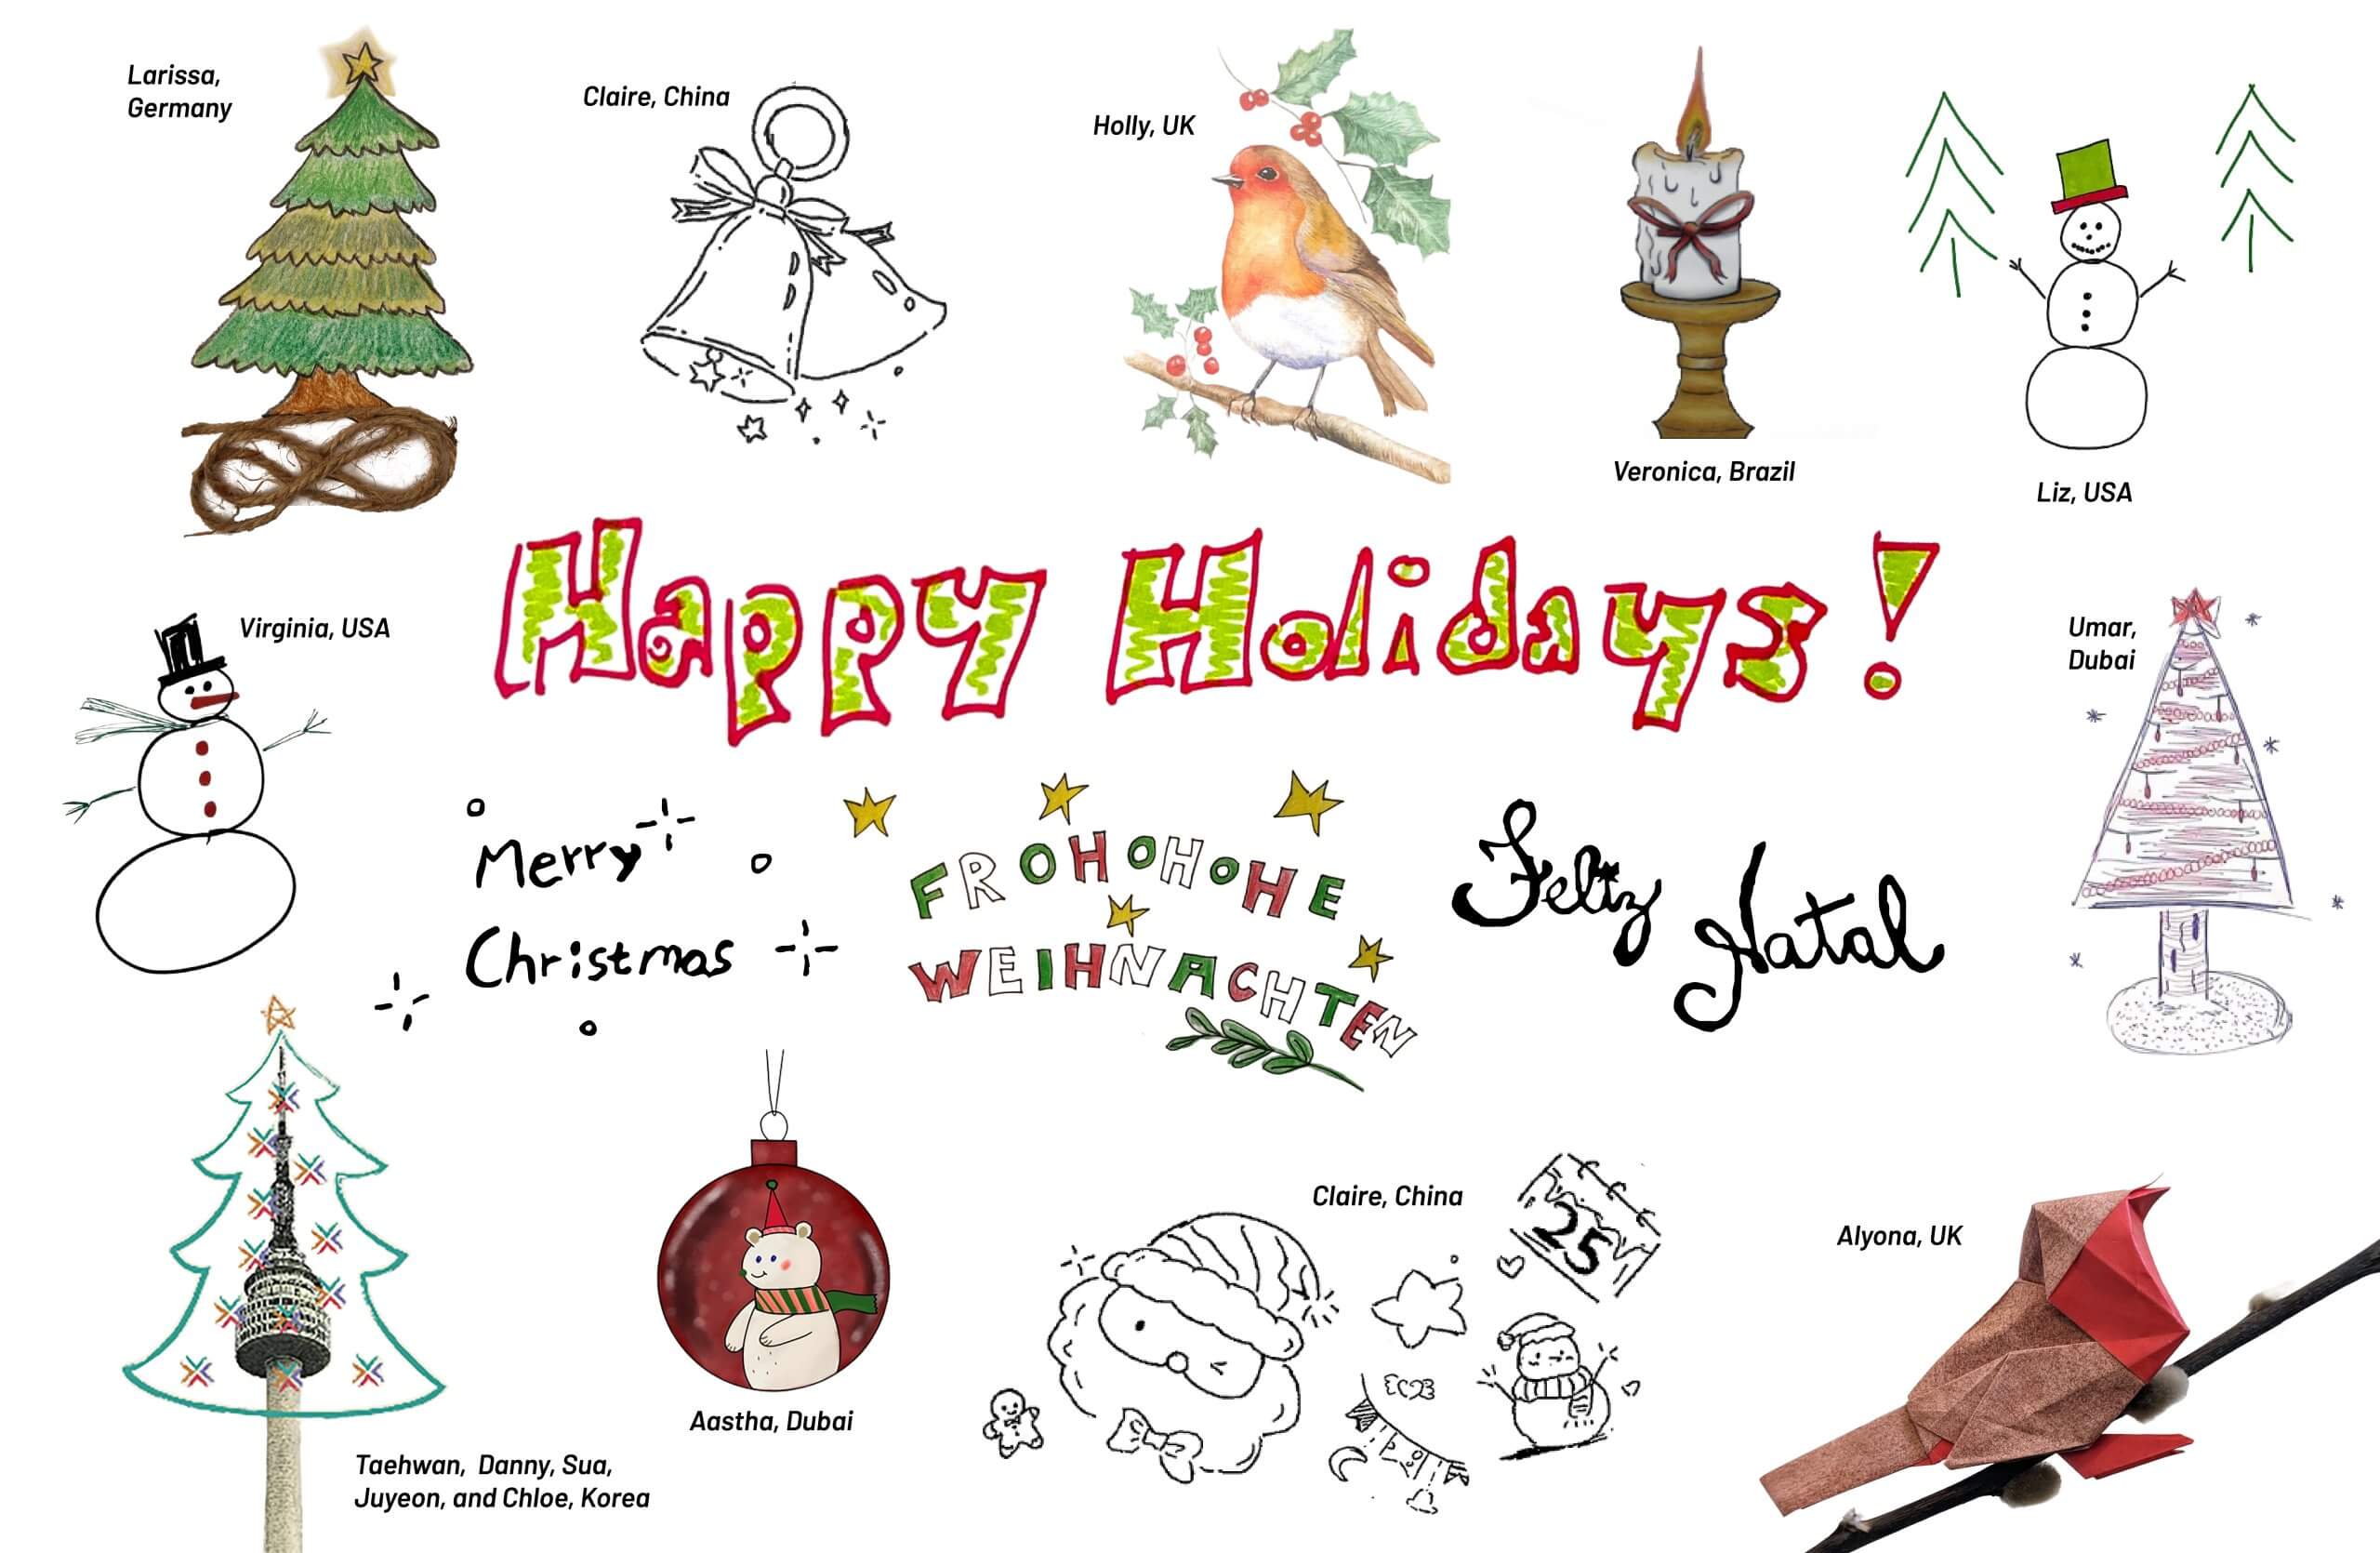 The image, on a white background, is a compilation of color, and black and white hand-drawn holiday/seasonally themed motifs around the written message ‘Happy Holidays, Merry Christmas, Frohohohe Weihnachten, and Feliz Natal’. The motifs, some of which are skillfully rendered while others are of a naiver style include three Christmas trees (one in colored pencils, one in fine point pen), and a digital tree from Korea which features the Namsan Seoul Tower. There are two snowmen, two robins (one of which is crafted in origami), a candle, a bell, a winking Santa Claus, and finally a red bauble containing a polar bear wearing a scarf and hat. The overall feeling of the piece is fun, festive, and handmade.